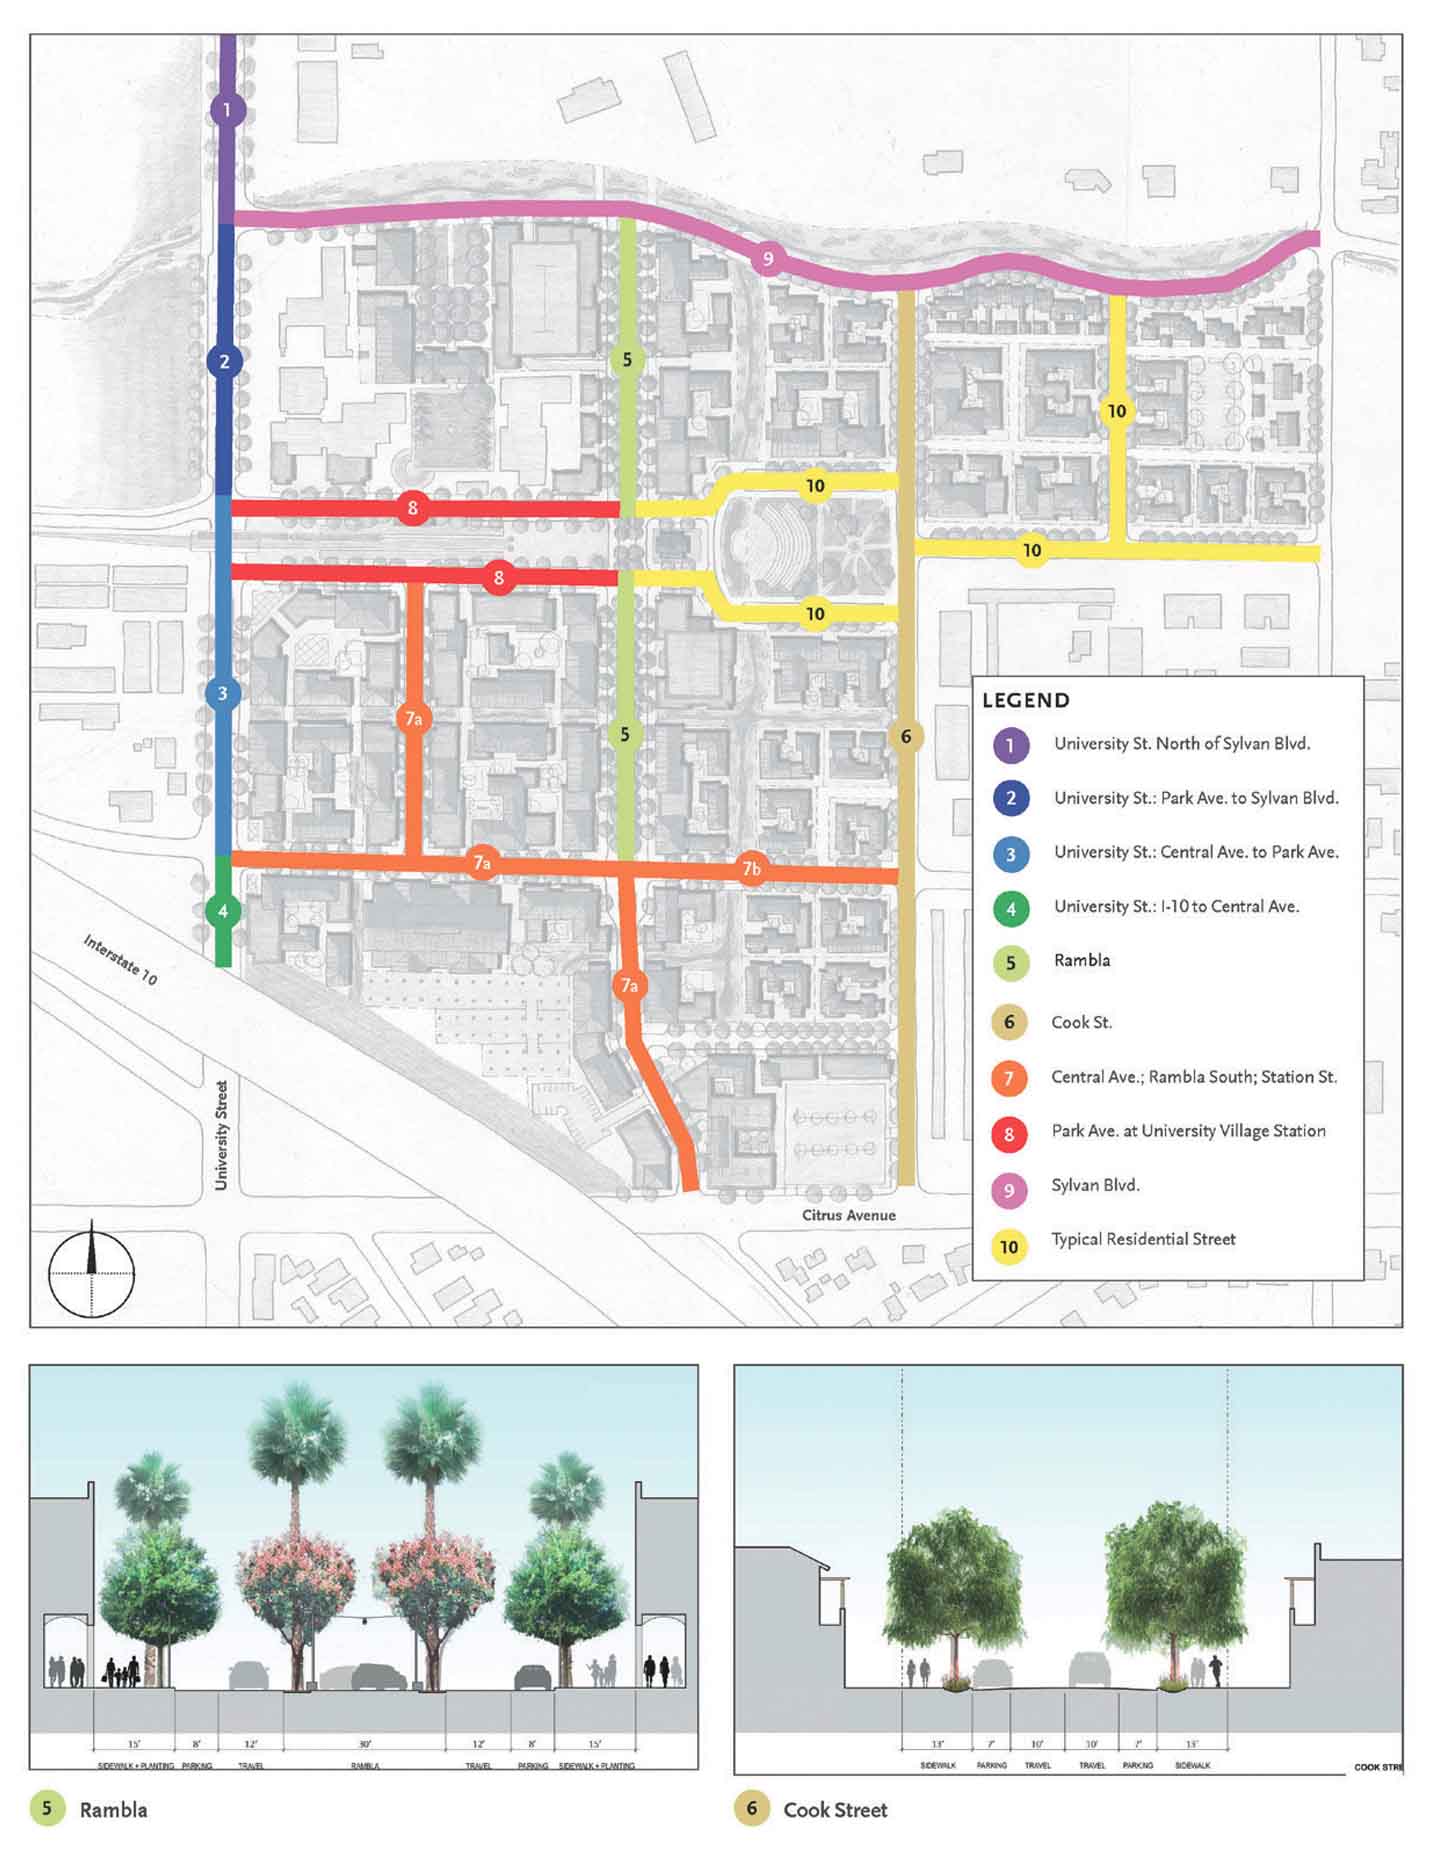 creating-memorable-streets-standards-new-transit-village-redlands-california-network-plan-identifies-village’s-various-while-sections-indicate-vehicular-travel-lane-sidewalk-widths-tree-character-each